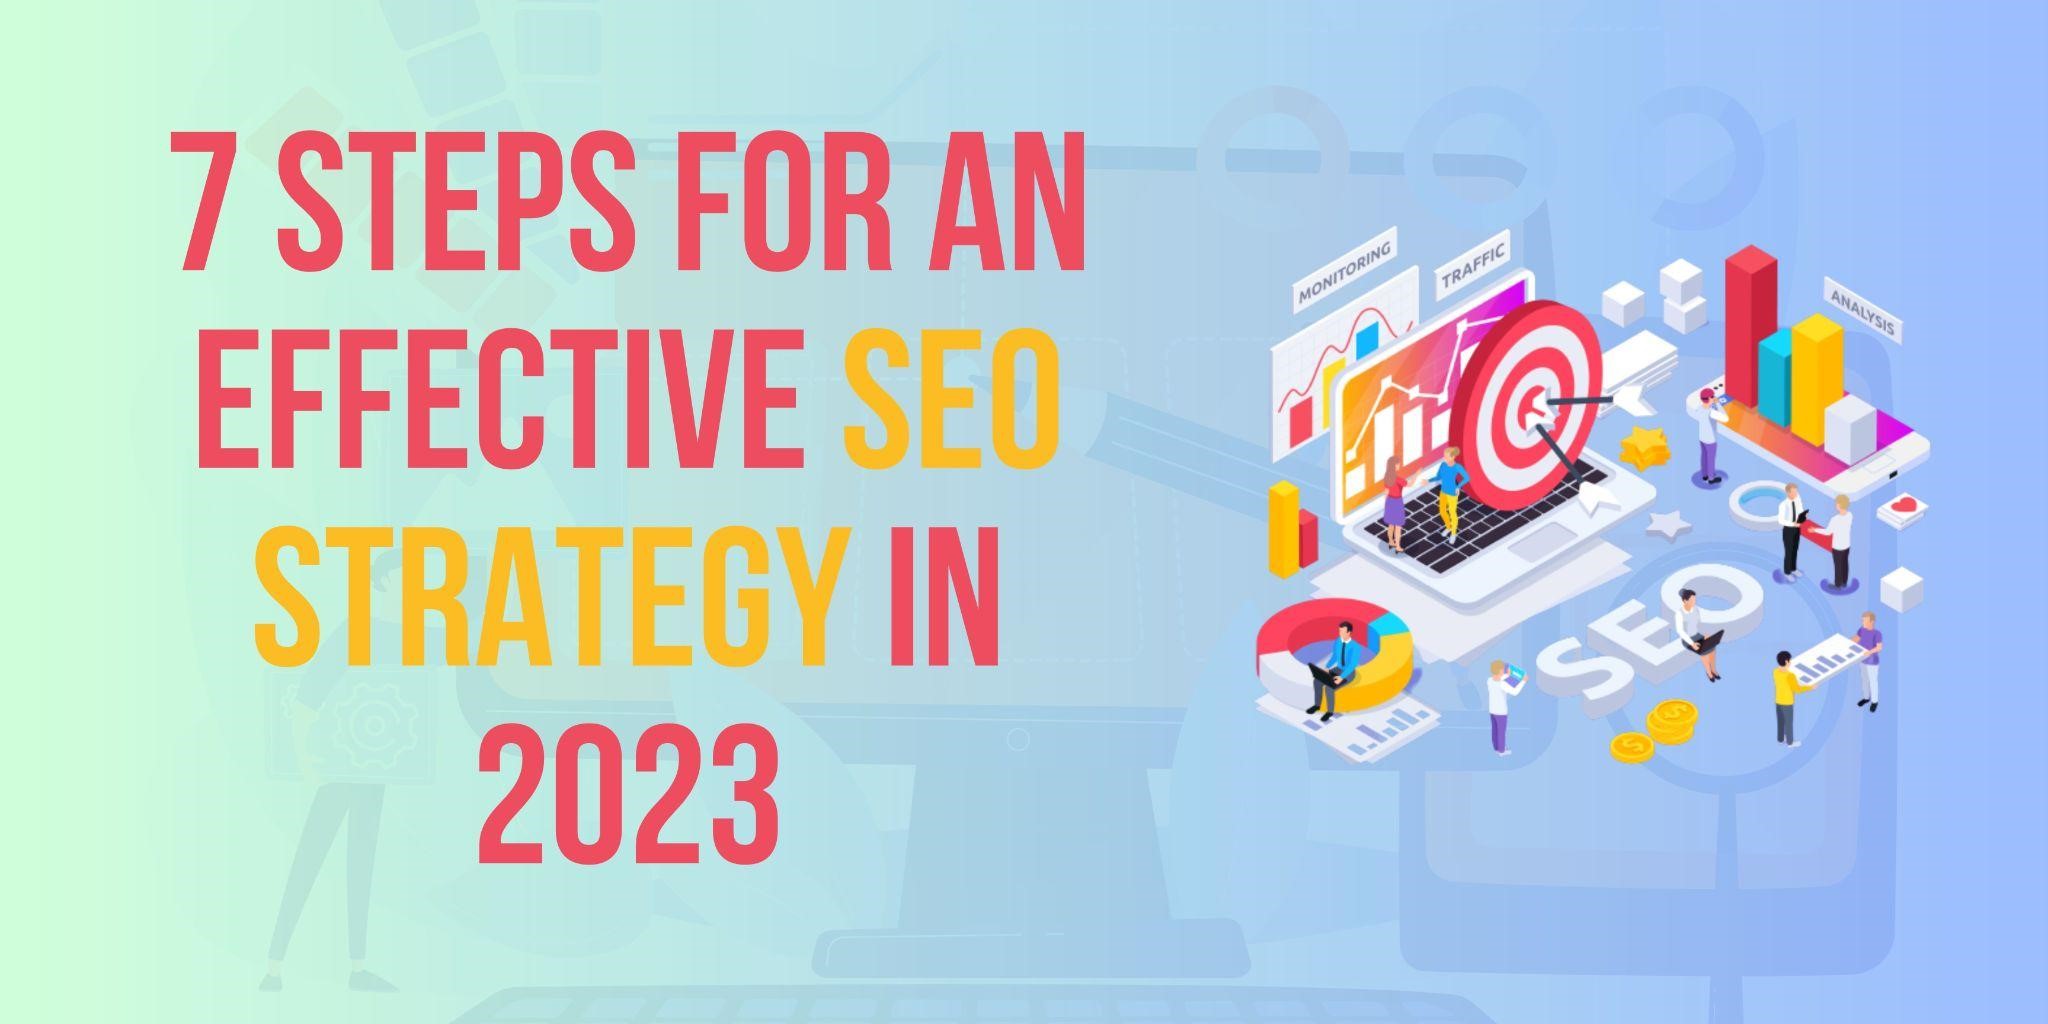 7 Steps for an Effective SEO Strategy in 2023